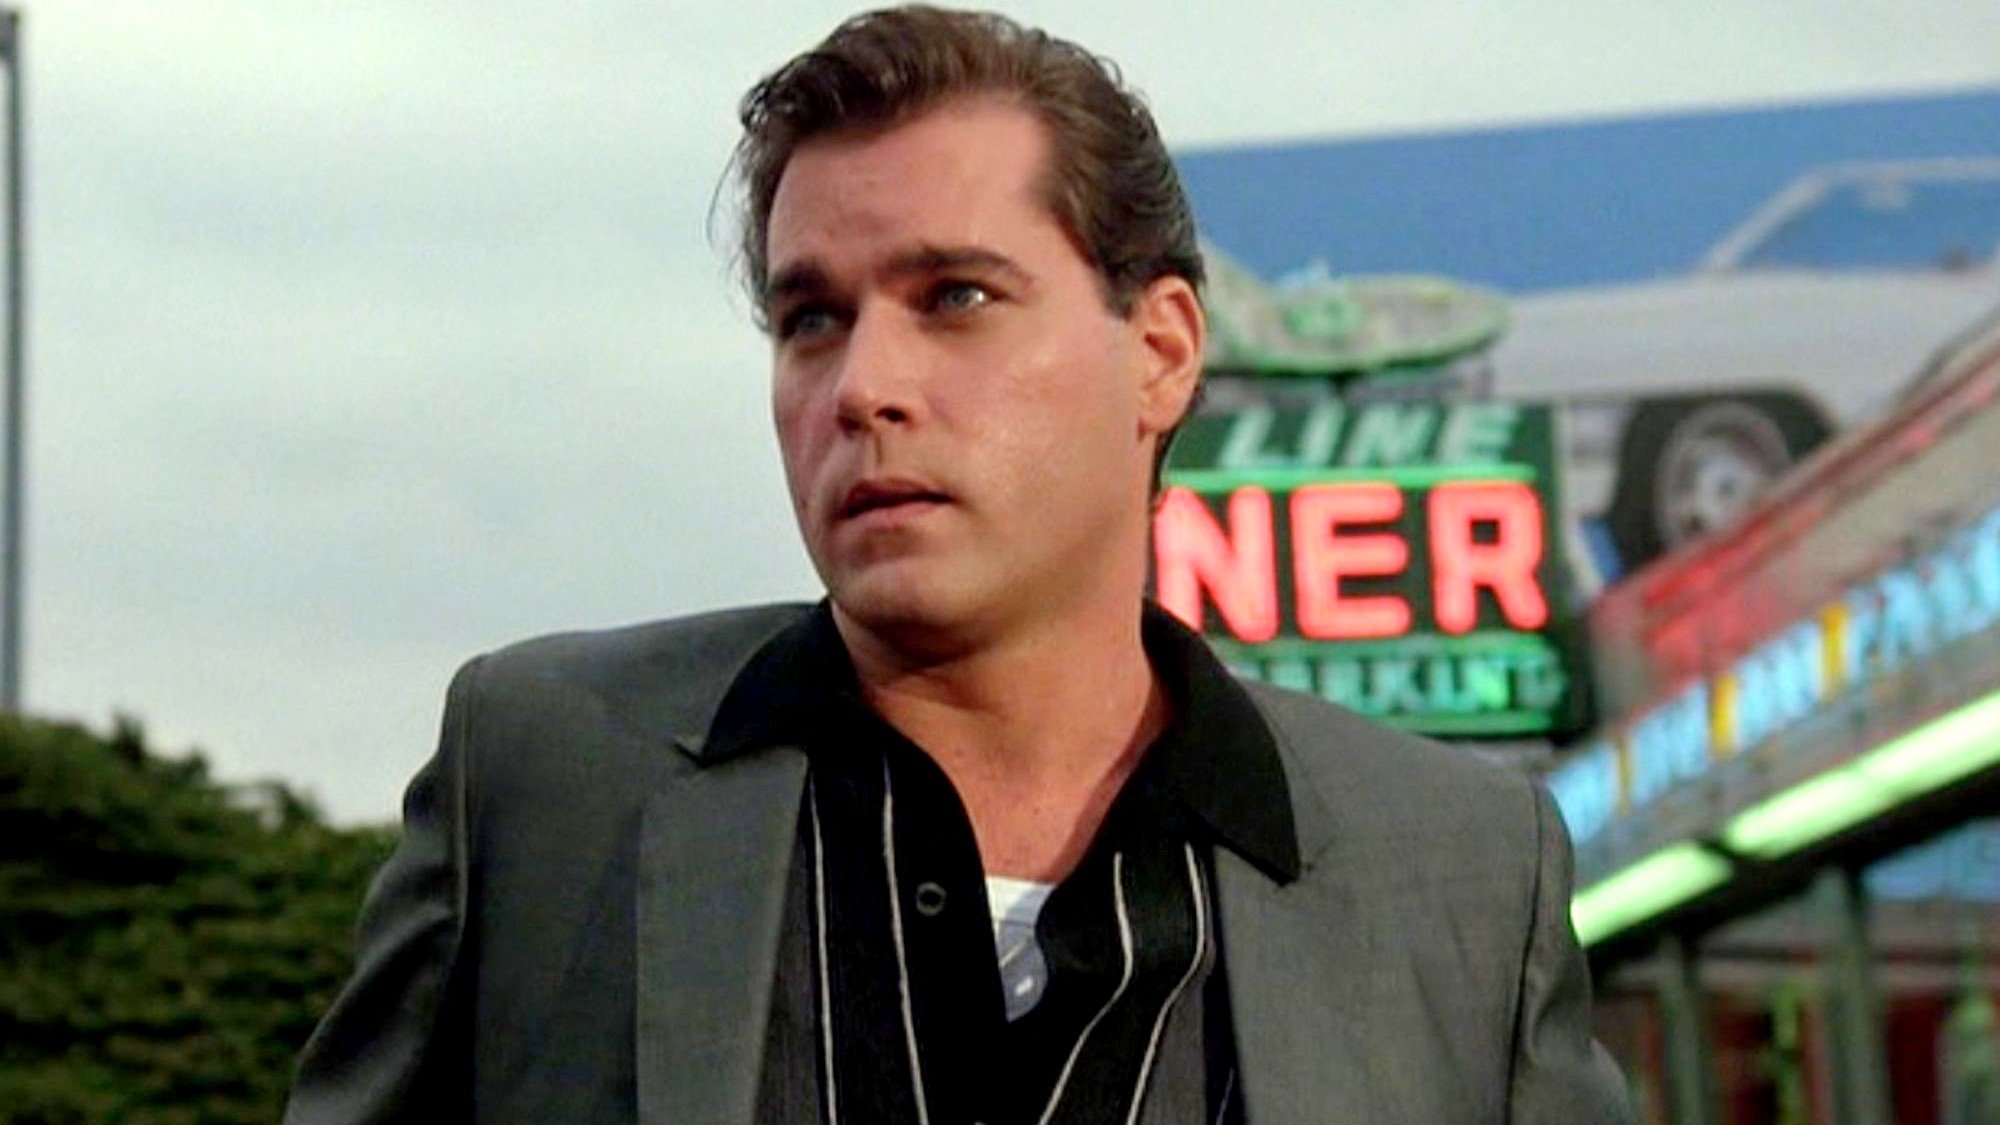 Ray Liotta, Legendary Actor From Goodfellas, Has Died